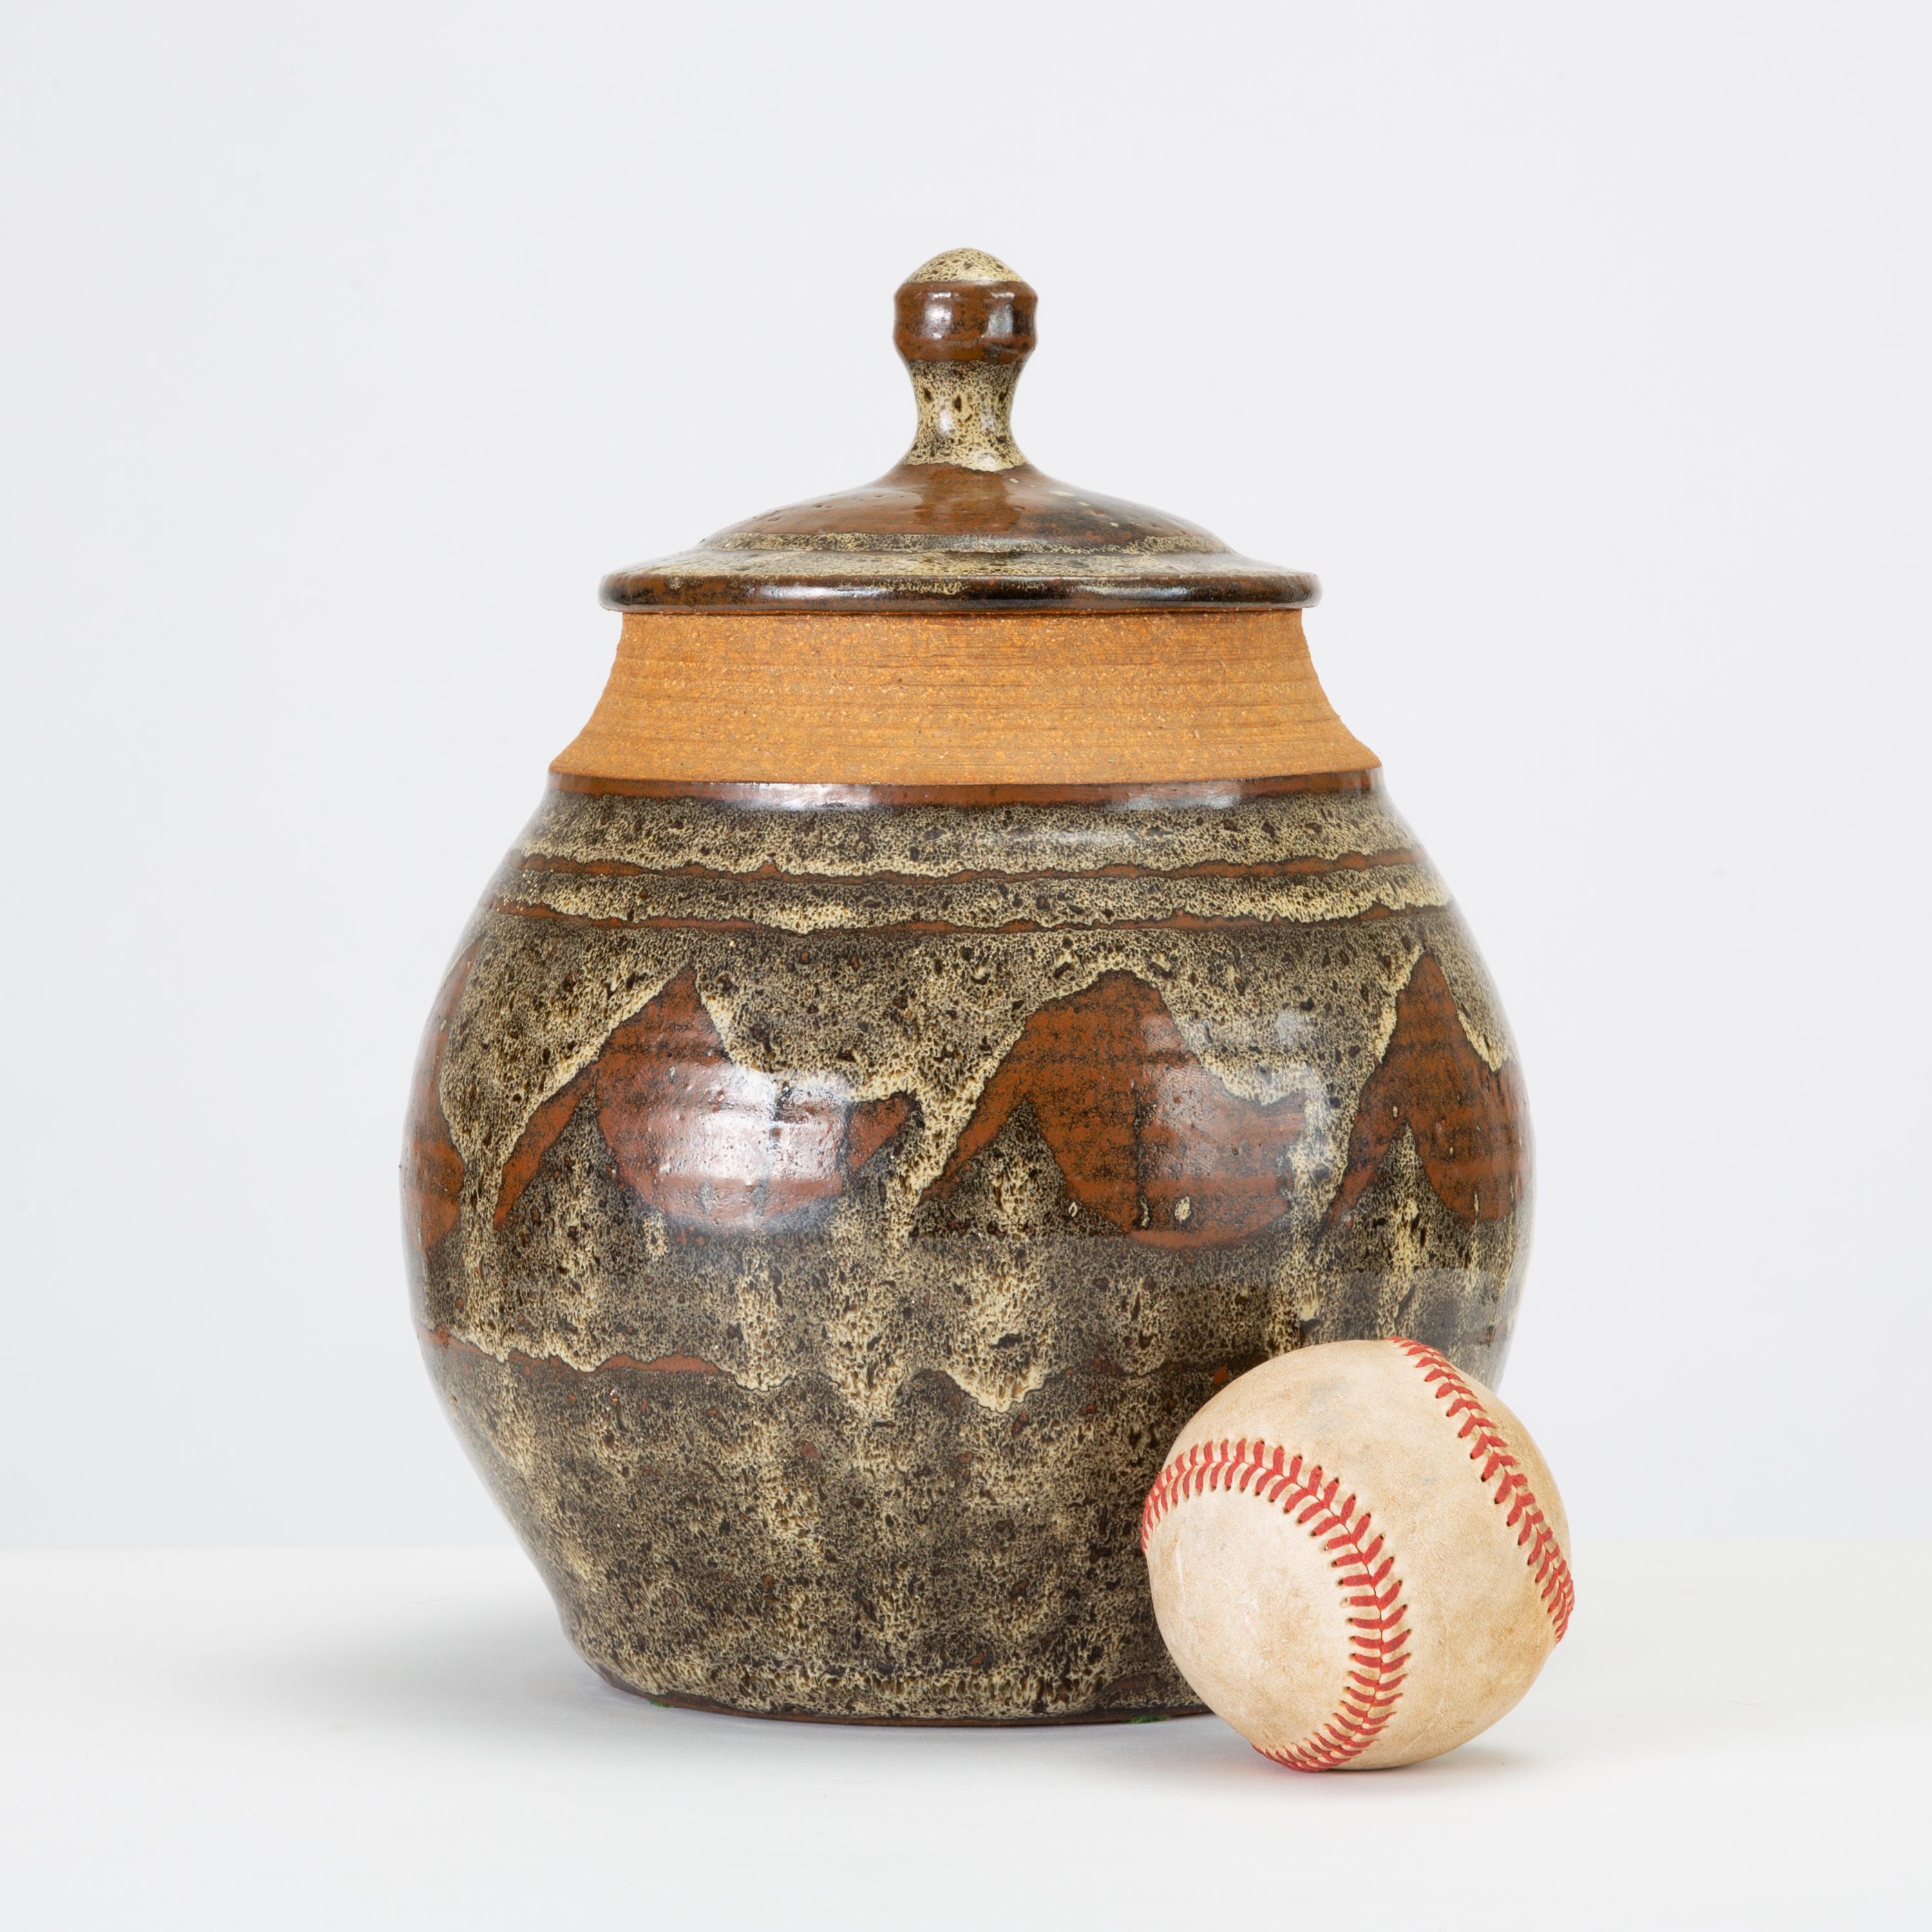 Don Jennings, a prominent local ceramicist based in orange County, California, worked as instructor and artist throughout the 1960s and 1970s. This example is a wheel-thrown ceramic lidded jar with an abstract pattern in high-gloss glaze - a